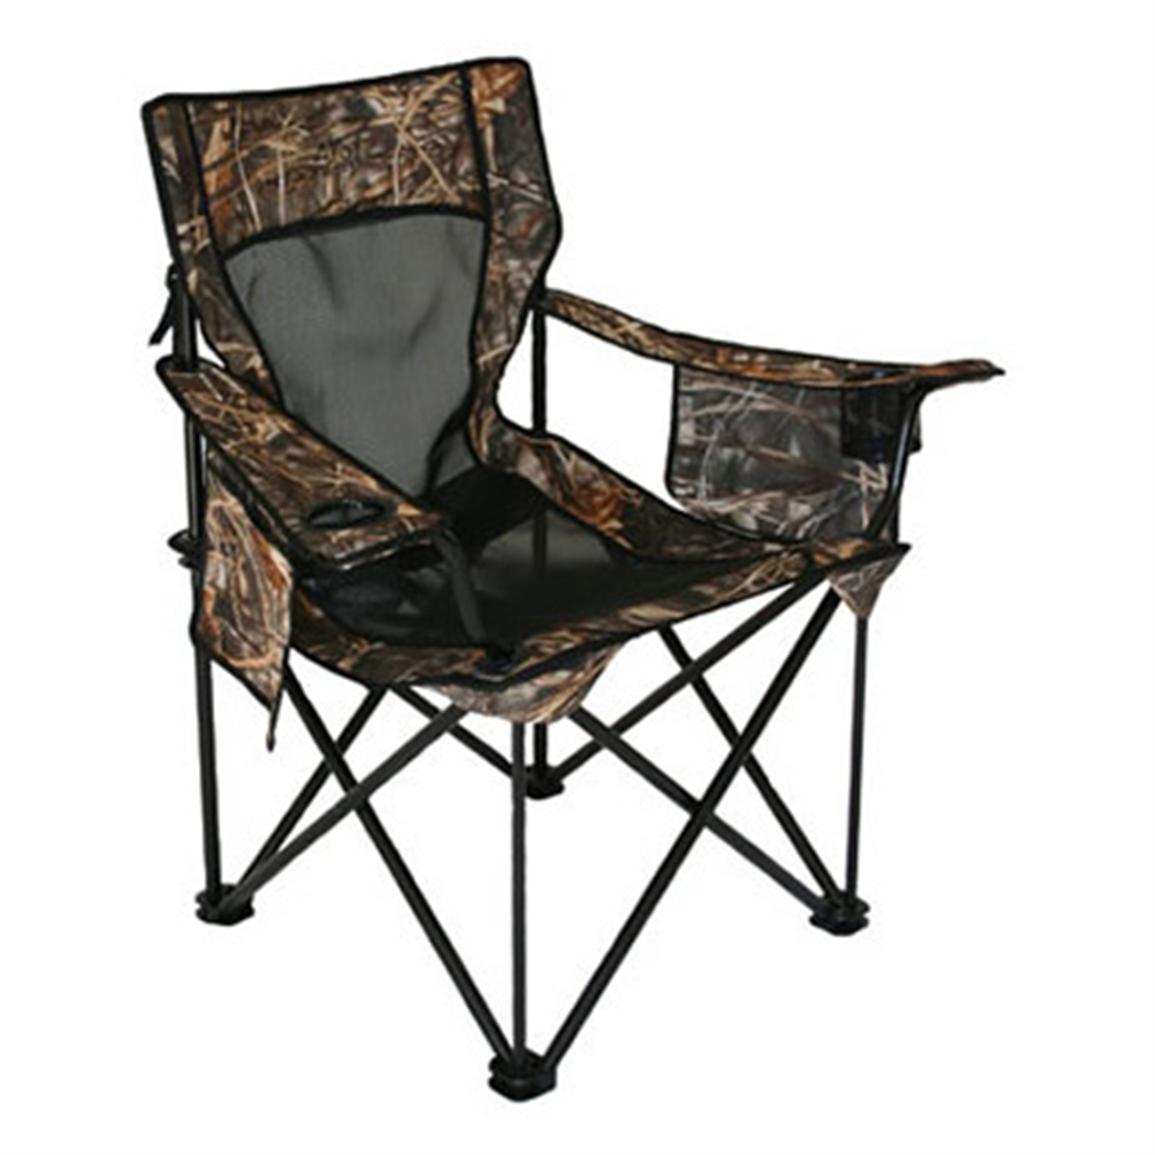 Alps Mountaineering® King Kong Mesh Chair 154539, Chairs